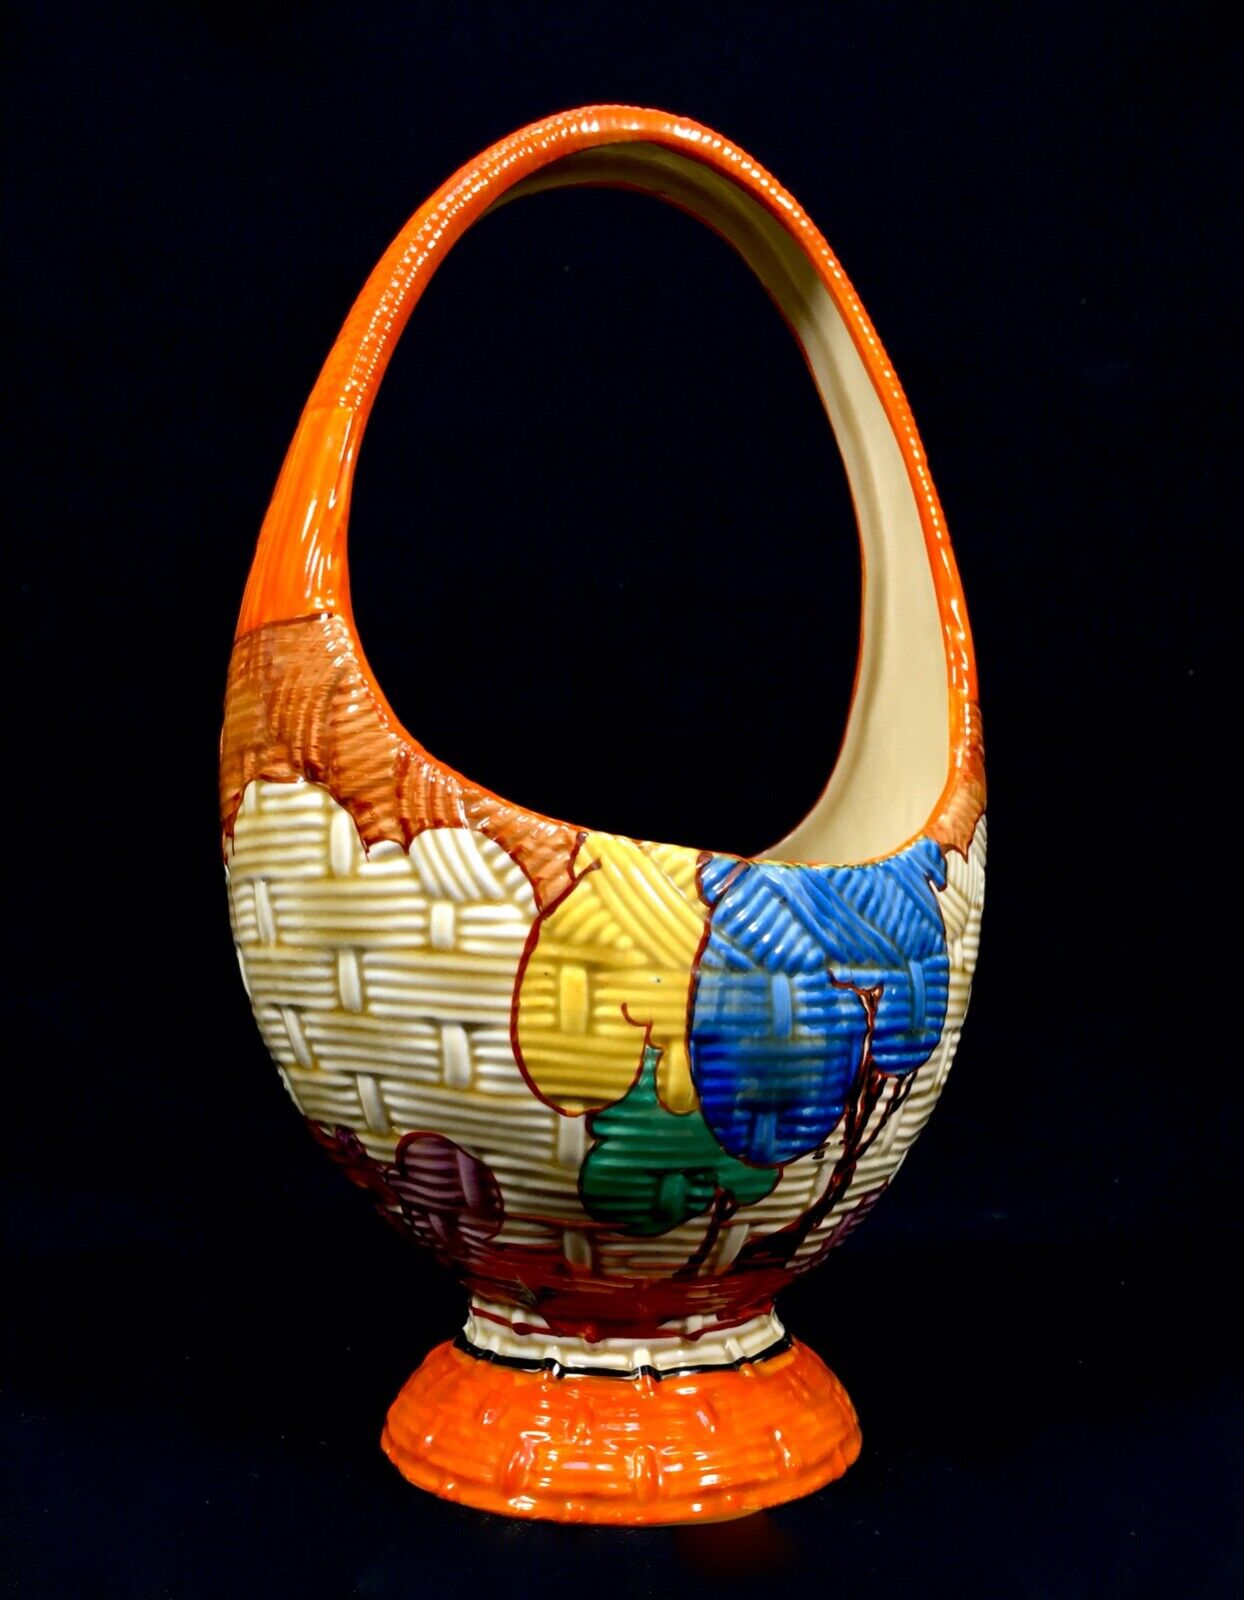 Clarice Cliff Gaiety Basket in Blue Autumn / Art Deco Pottery / Antique / c1931